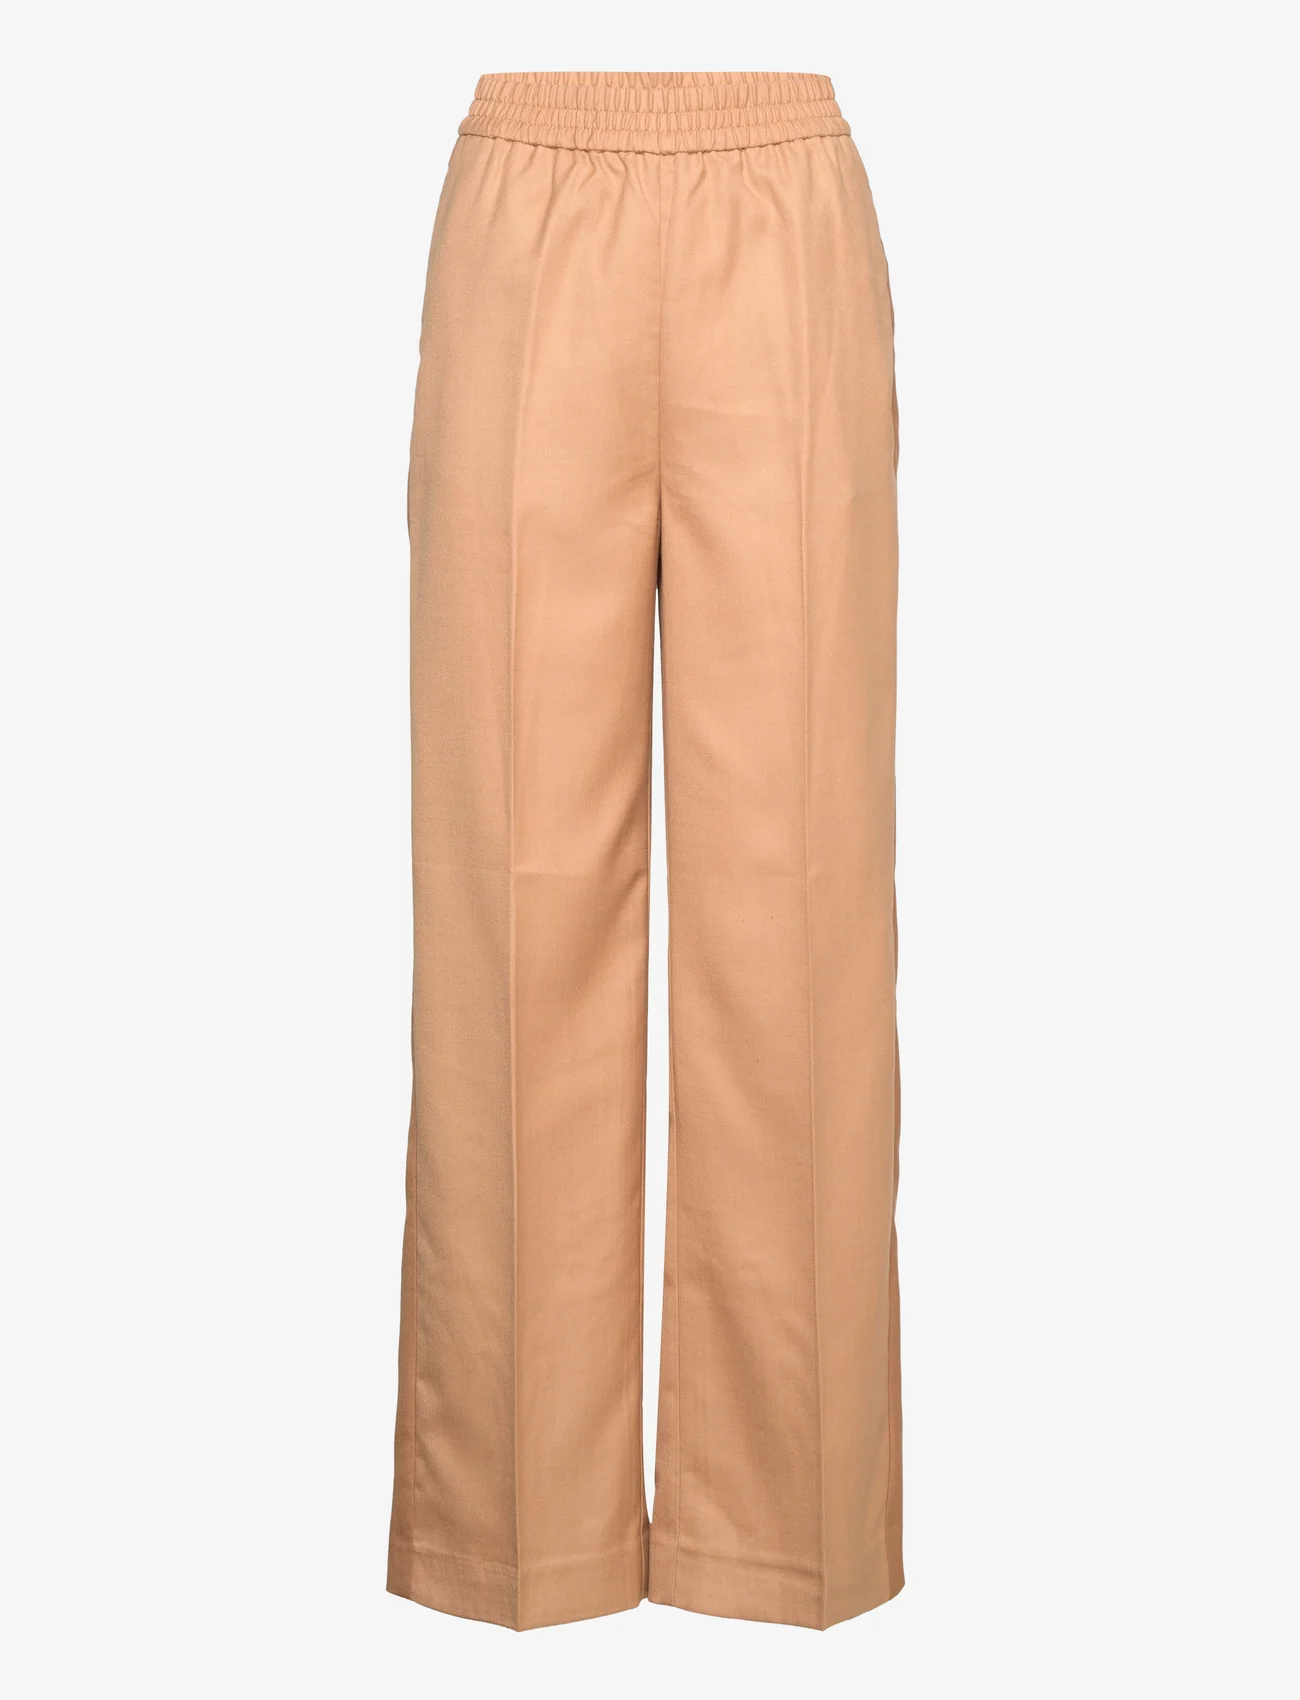 GANT - D1. STRAIGHT PULL ON PANTS - straight leg trousers - toffee beige - 0